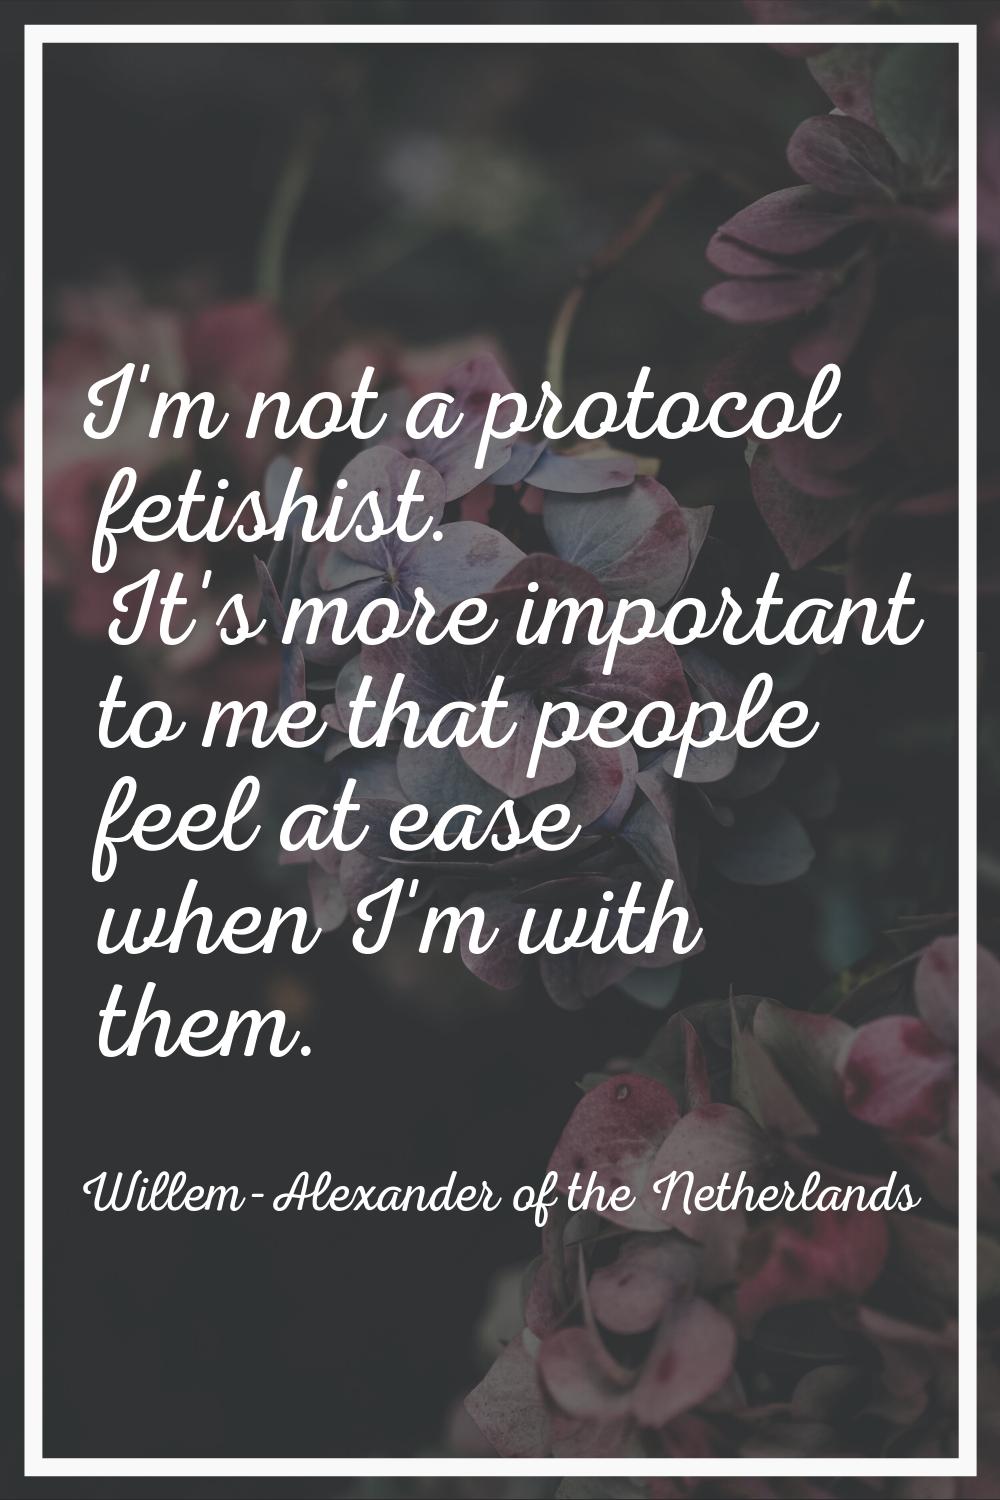 I'm not a protocol fetishist. It's more important to me that people feel at ease when I'm with them